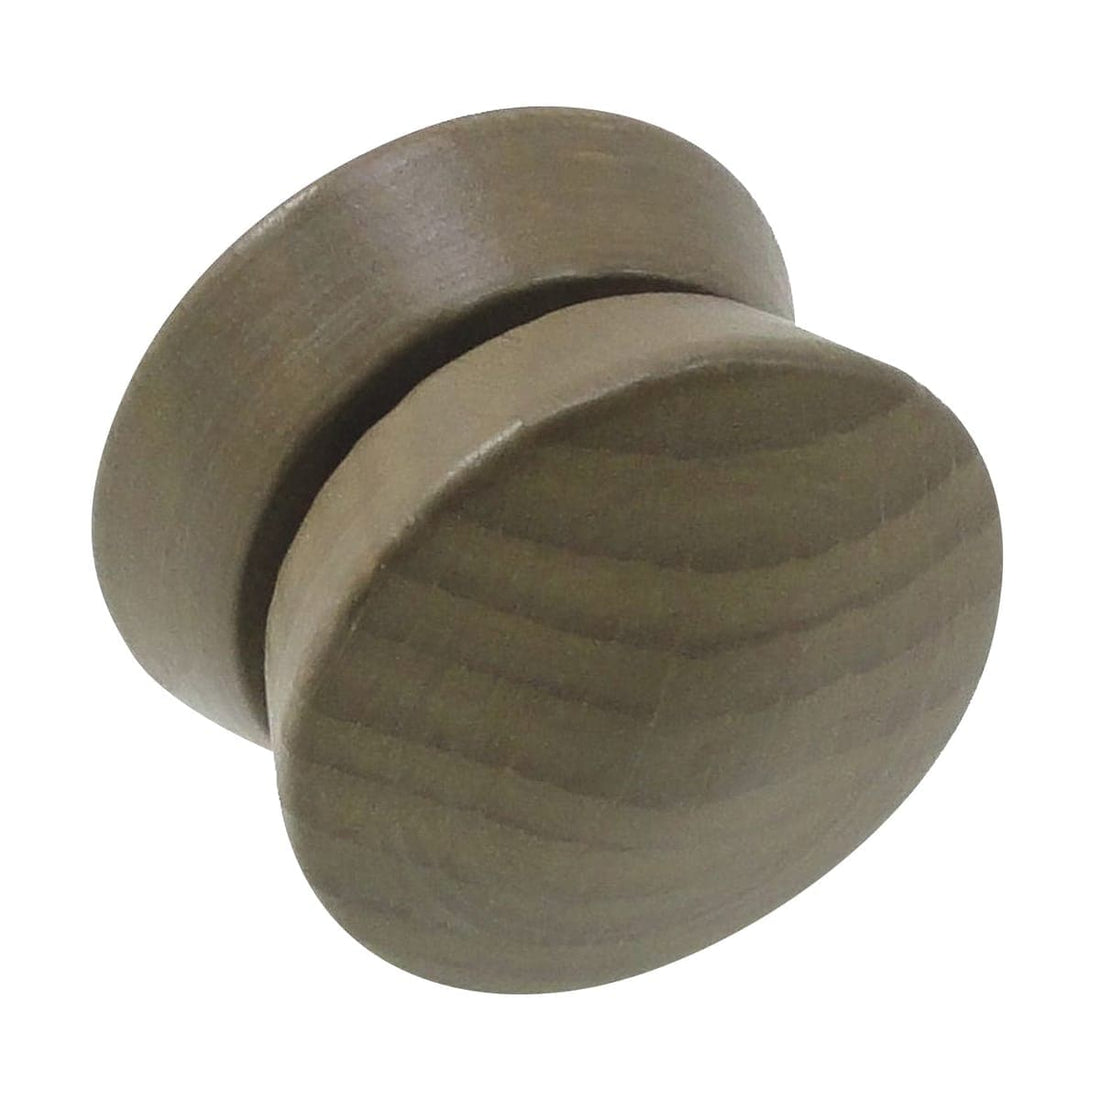 MAGNETIC BUTTONS WOOD 32 MM DOVE GREY 2 PIECES - best price from Maltashopper.com BR480003822